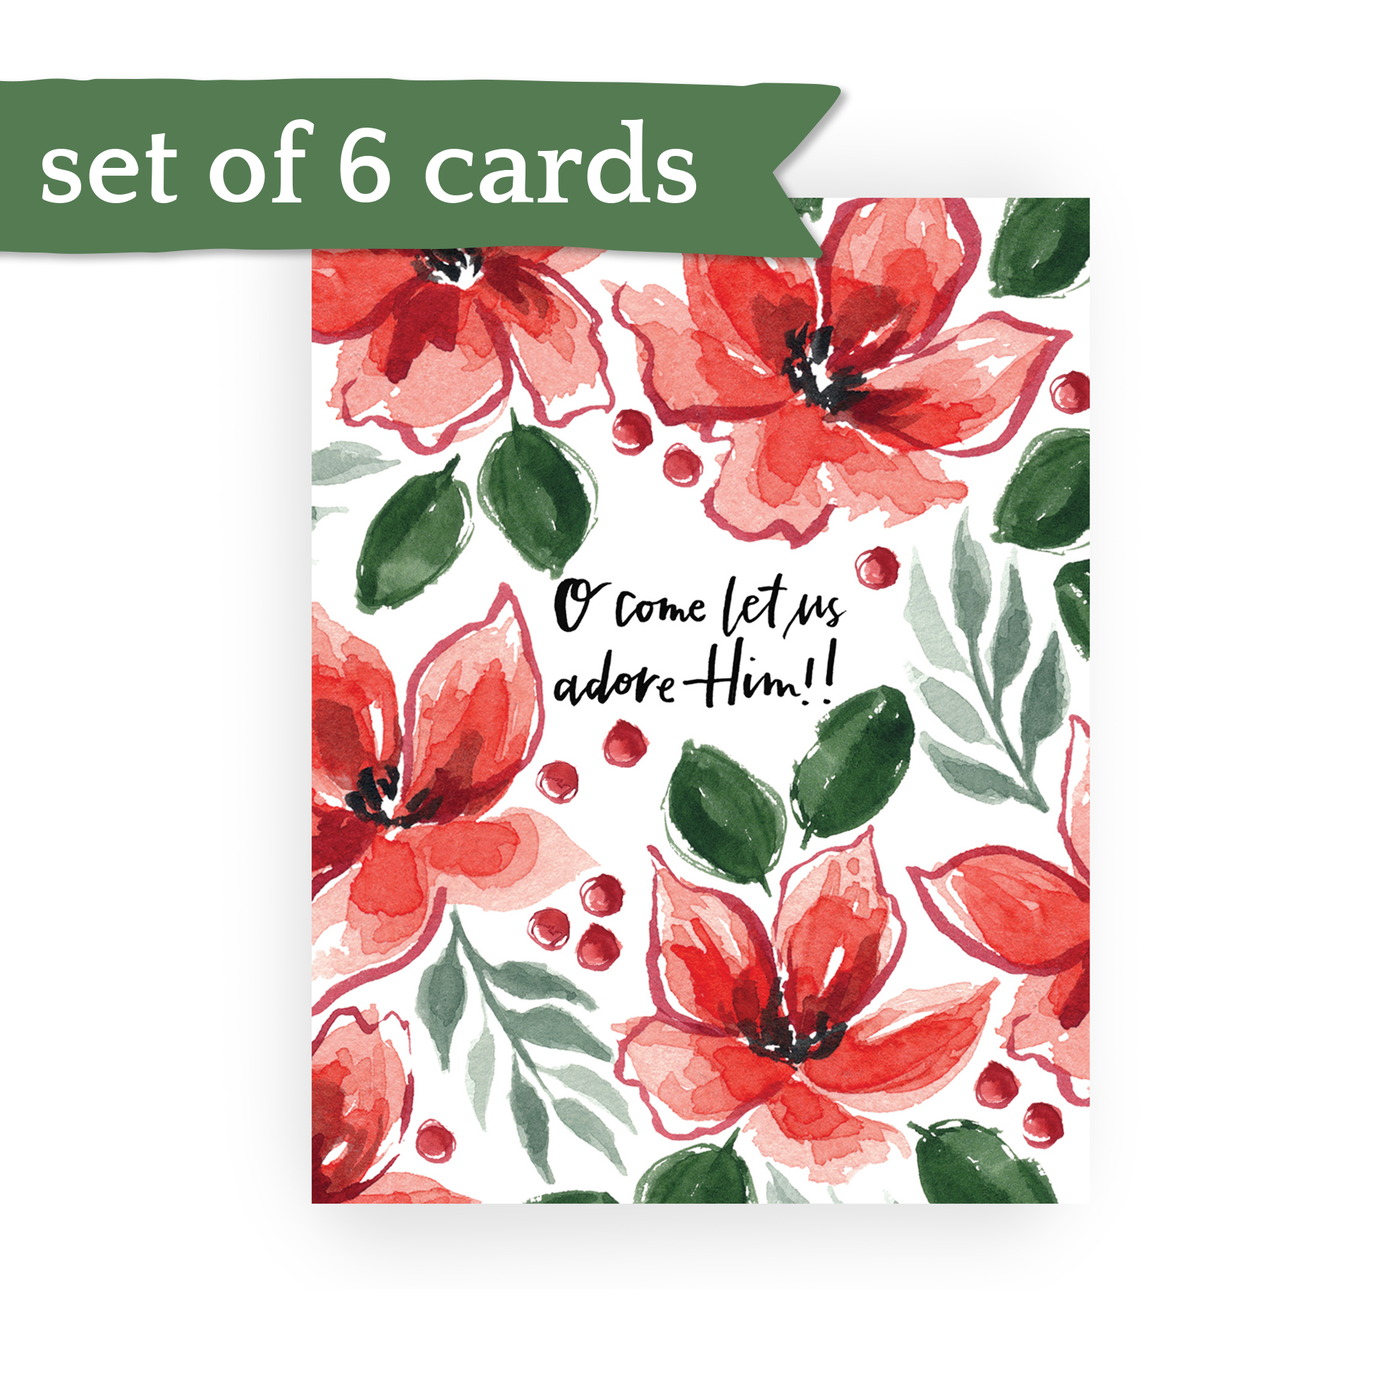 set of 6 O come let us adore Him cards